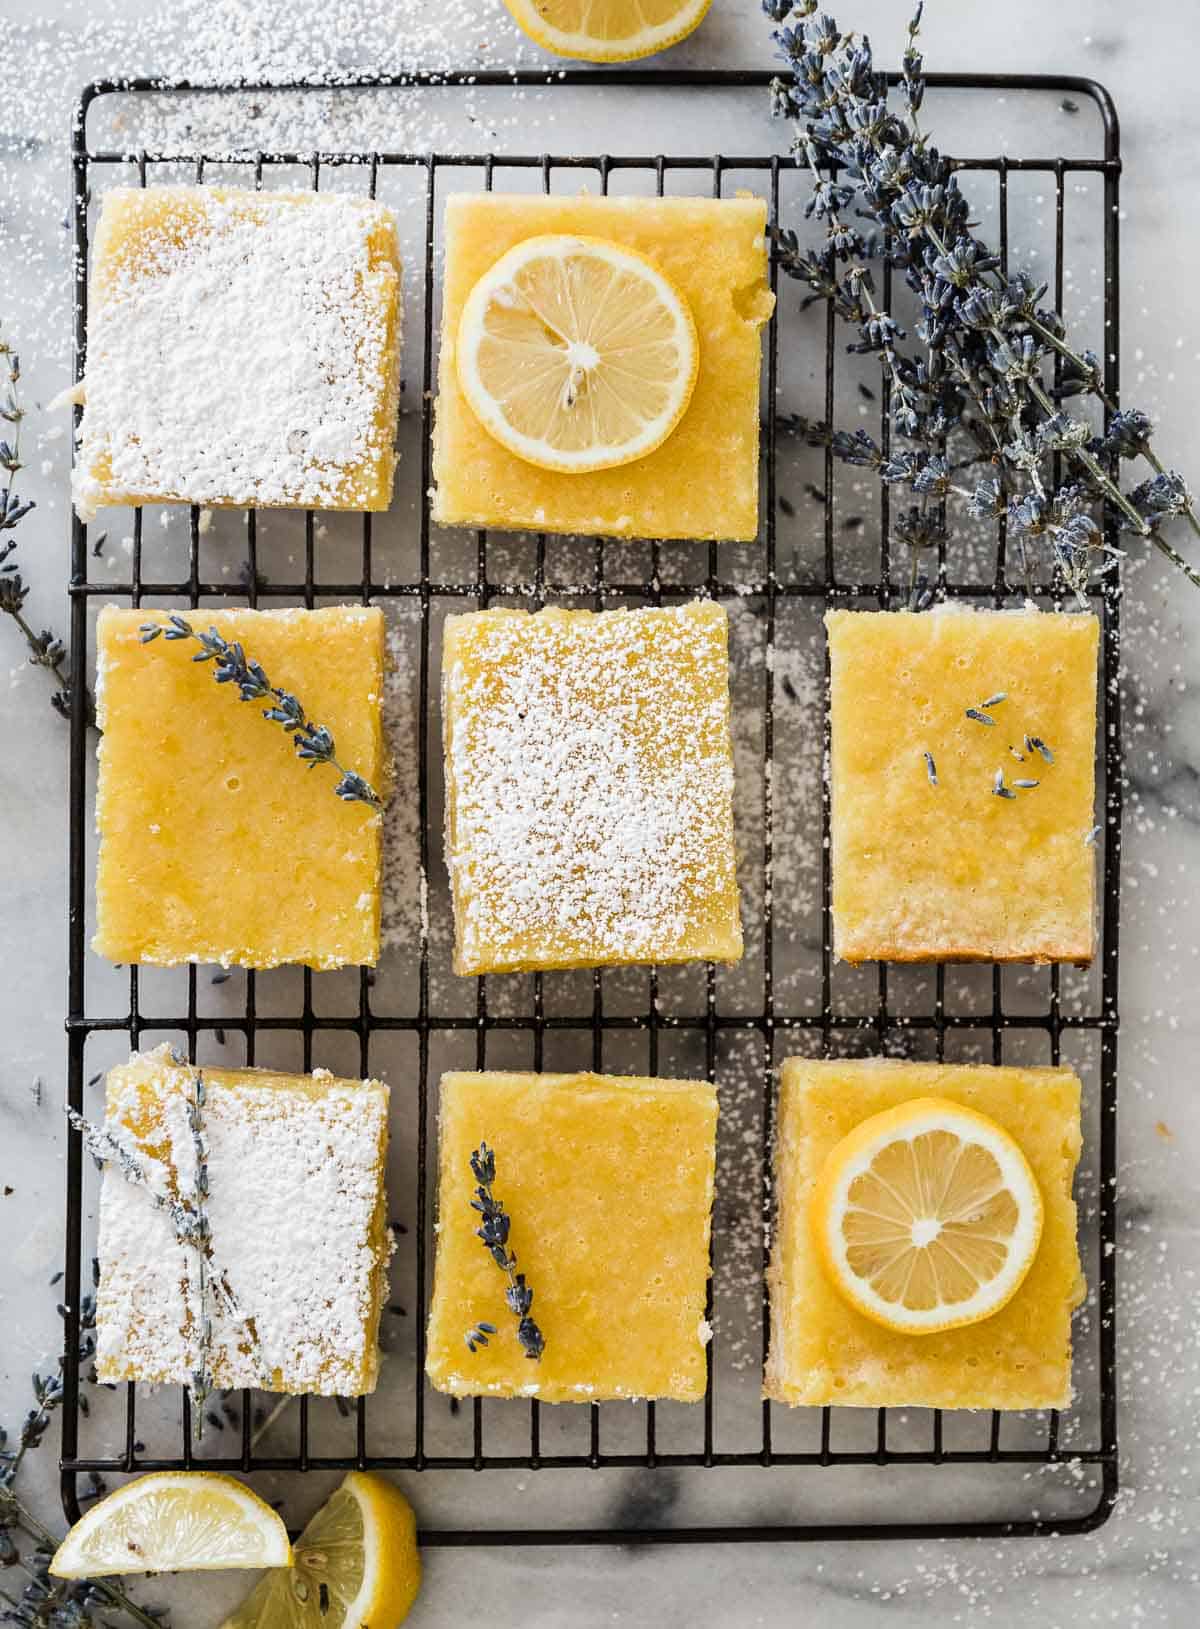 Easy lemon bars laid out on a wire cooling rack. They are garnished with lemon slices, and lavender sprigs.